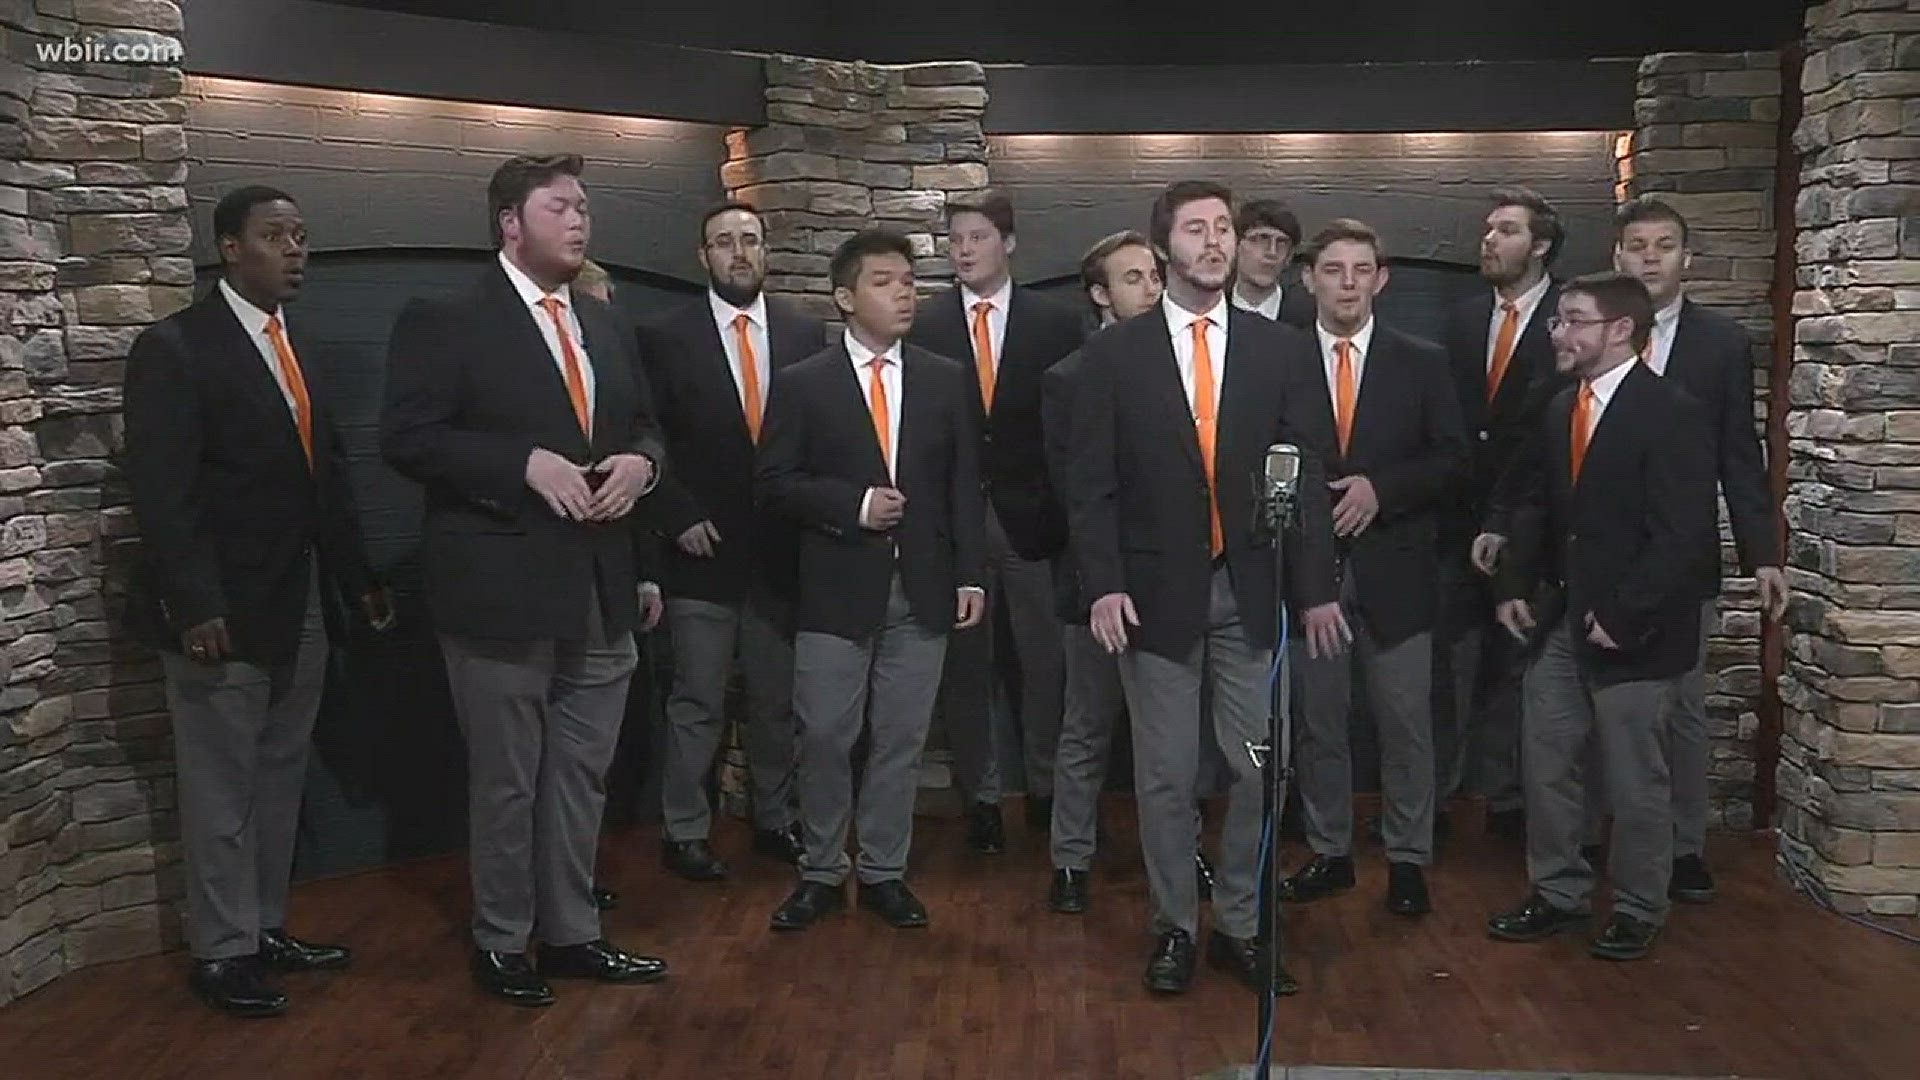 To learn more about the University of Tennessee A Capella group VOLume visit their Facebook and Instagram @VOLumeUTKJanuary 24, 2018-4pm